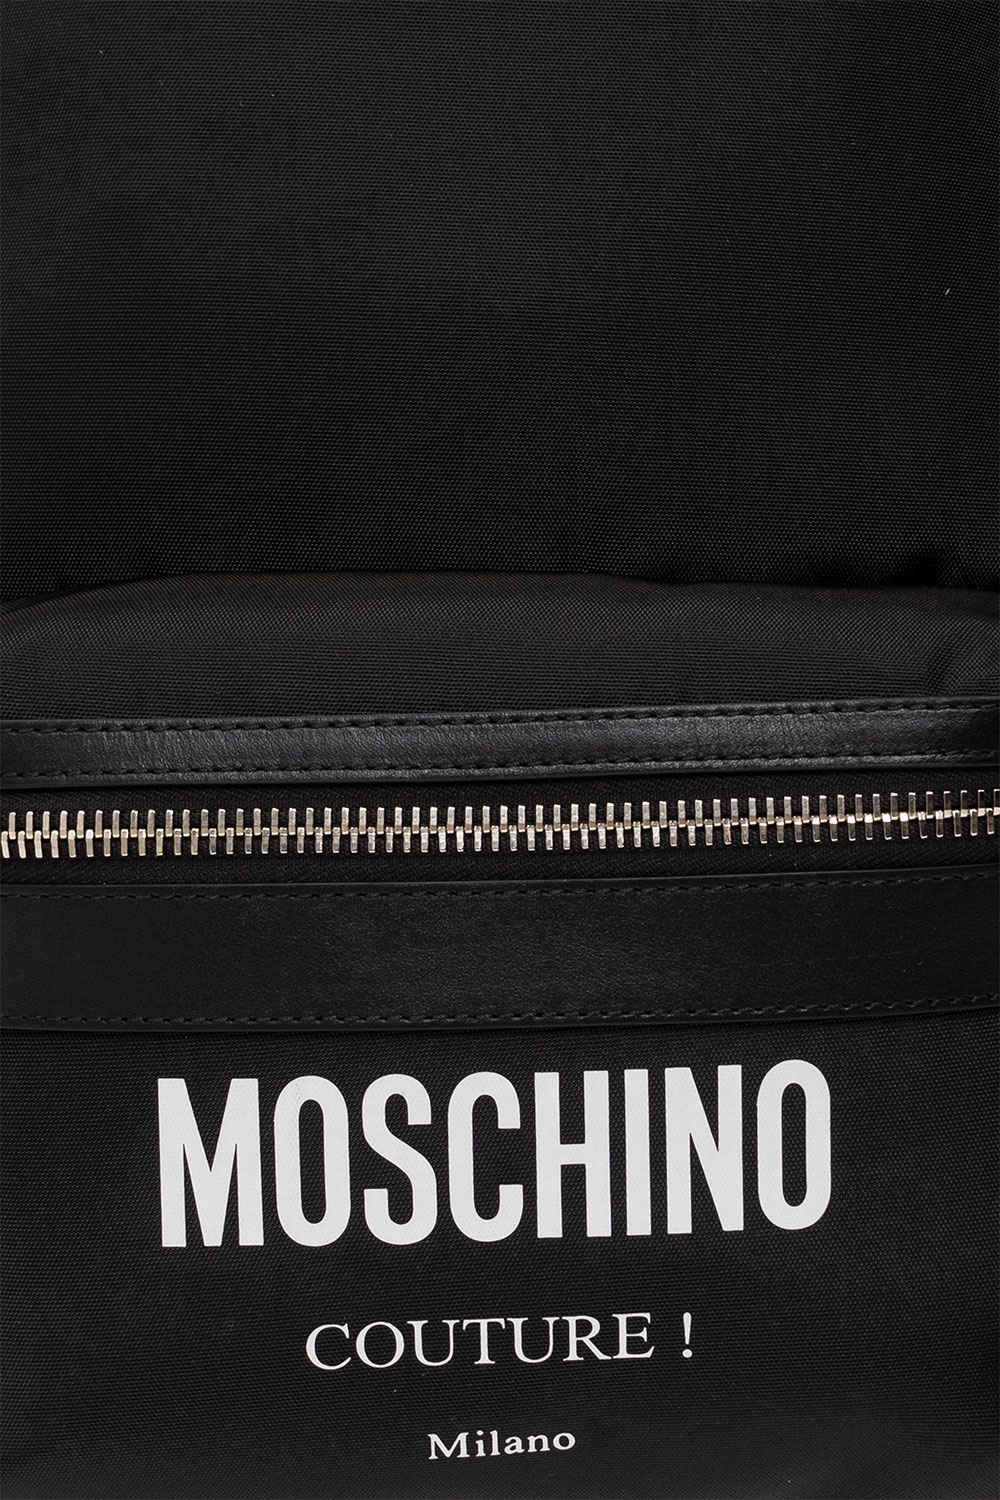 Moschino Backpack with logo